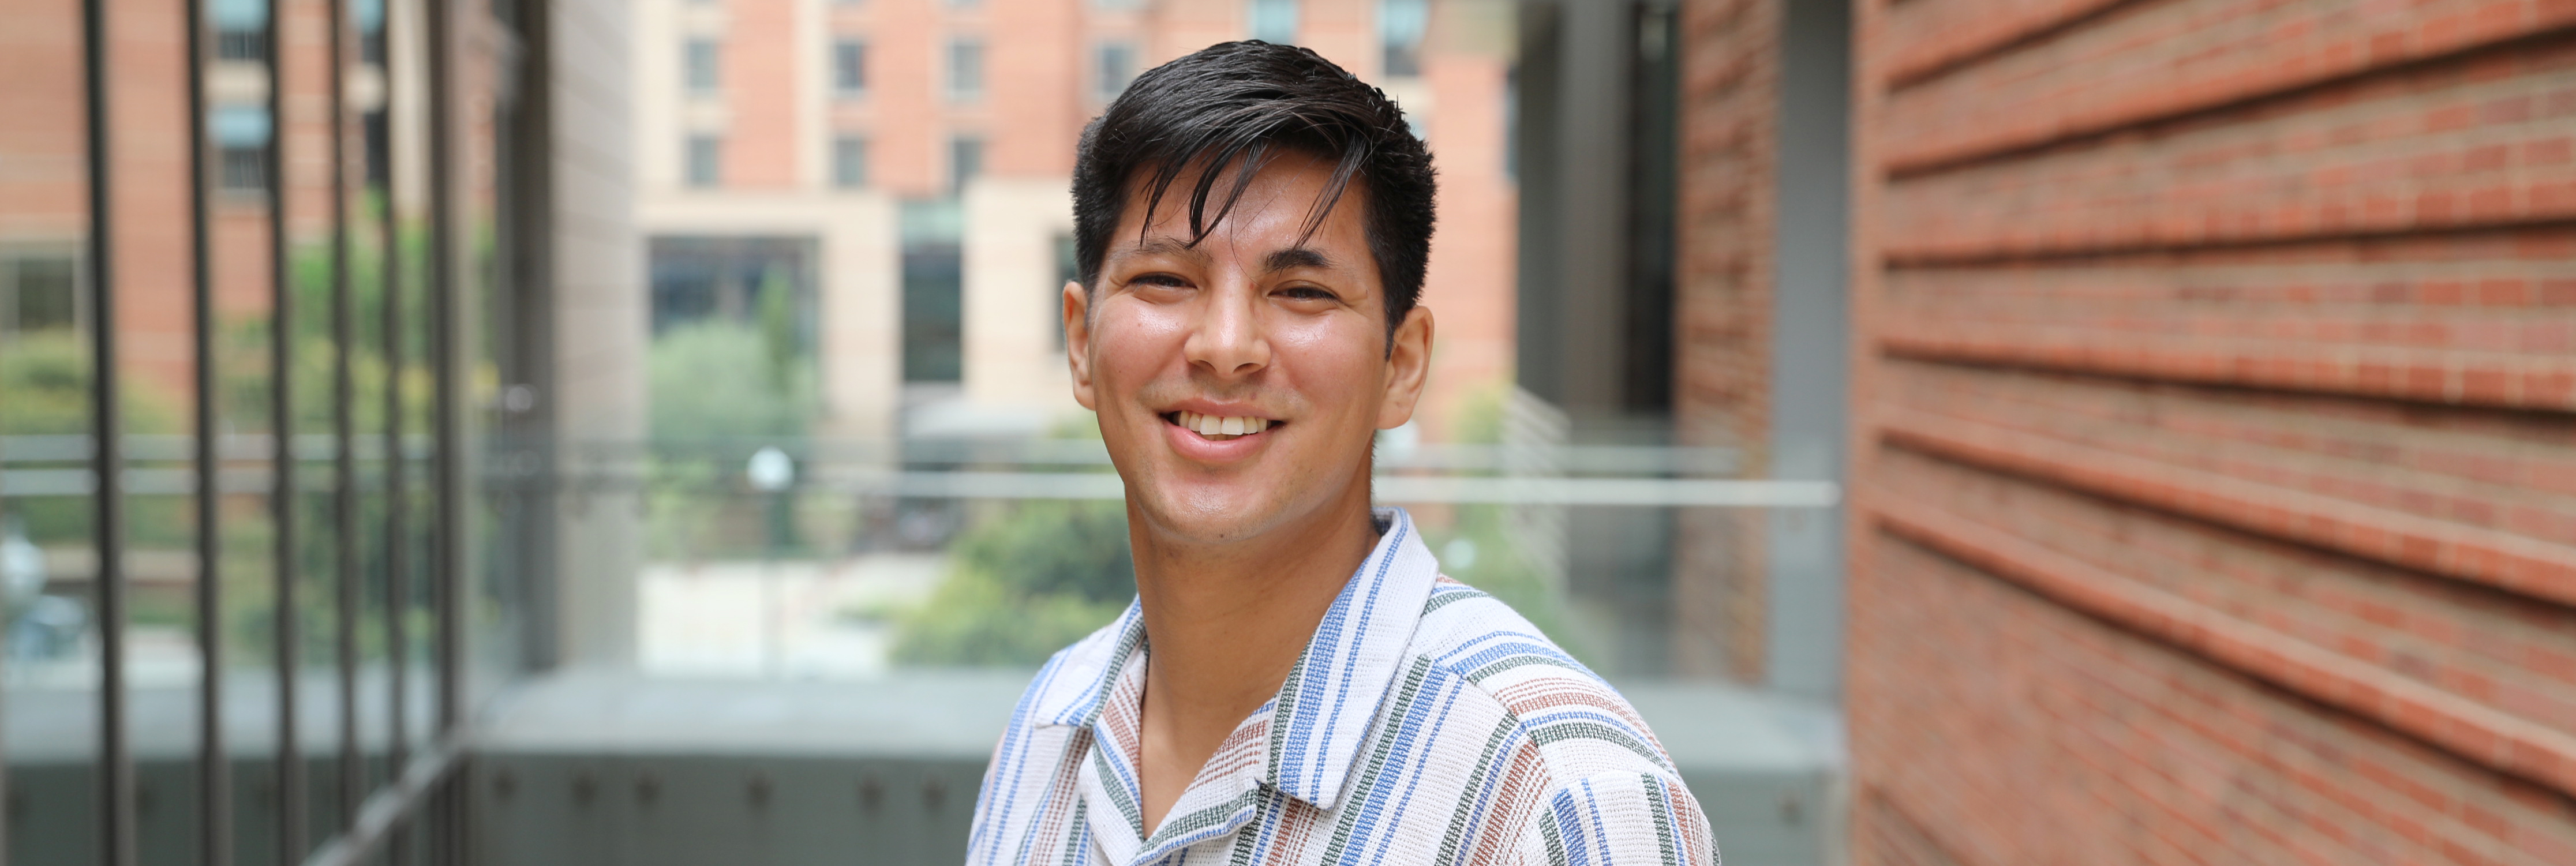 First-Gen Latino Doctoral Student Aims to Make an Impact in STEM